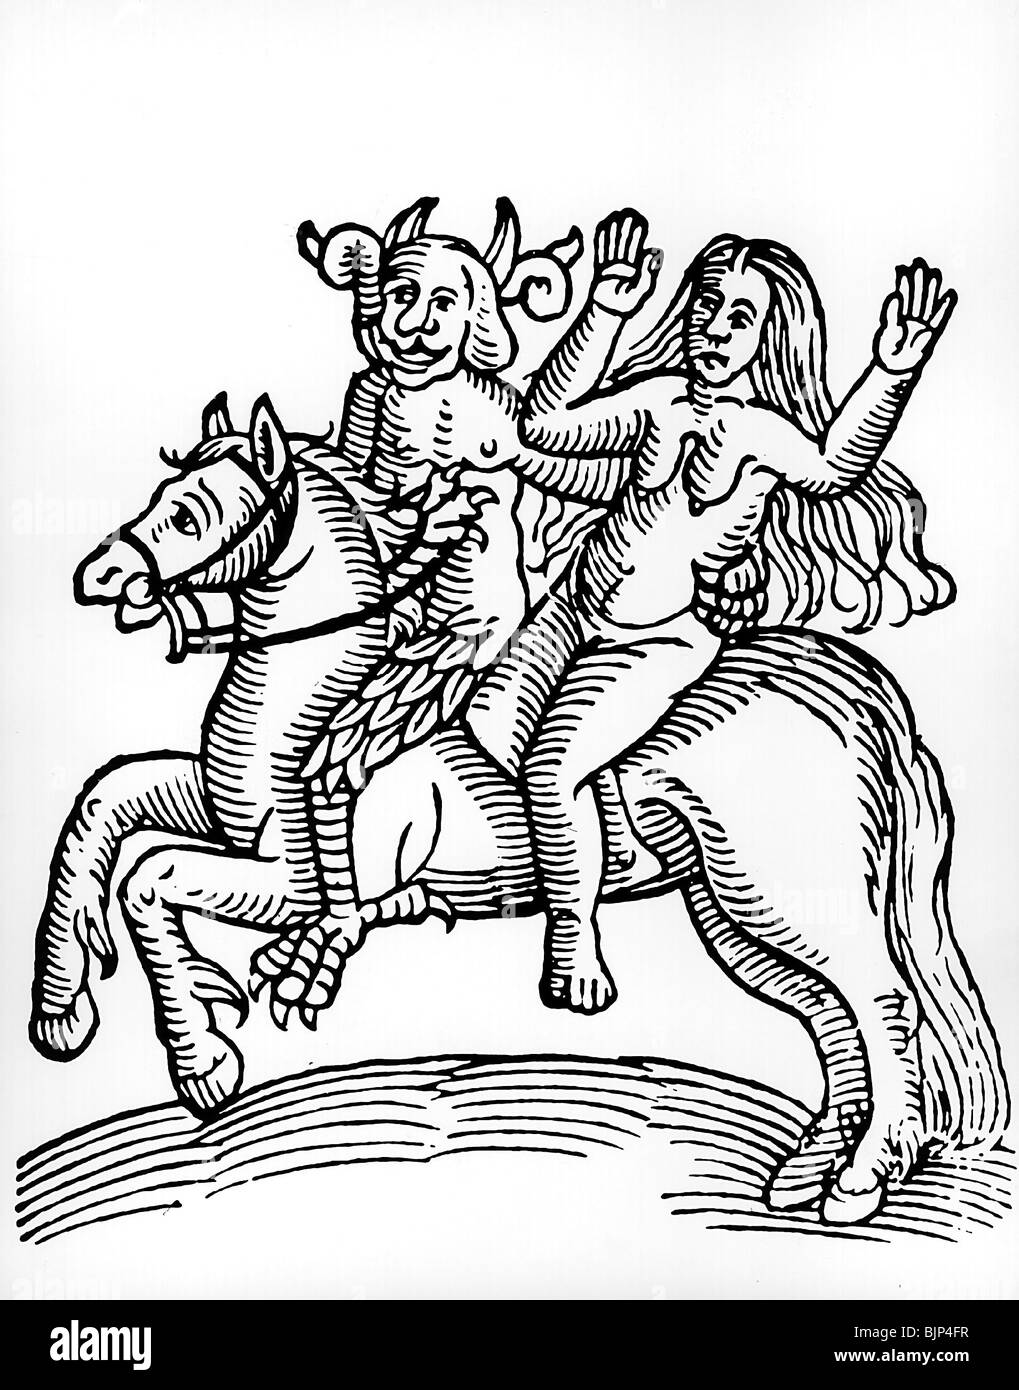 superstition, witchcraft, witch with devil riding on horse, 'The Witch of Berkely', woodcut from the chronicle of William of Malmesbury, 12th century, Stock Photo